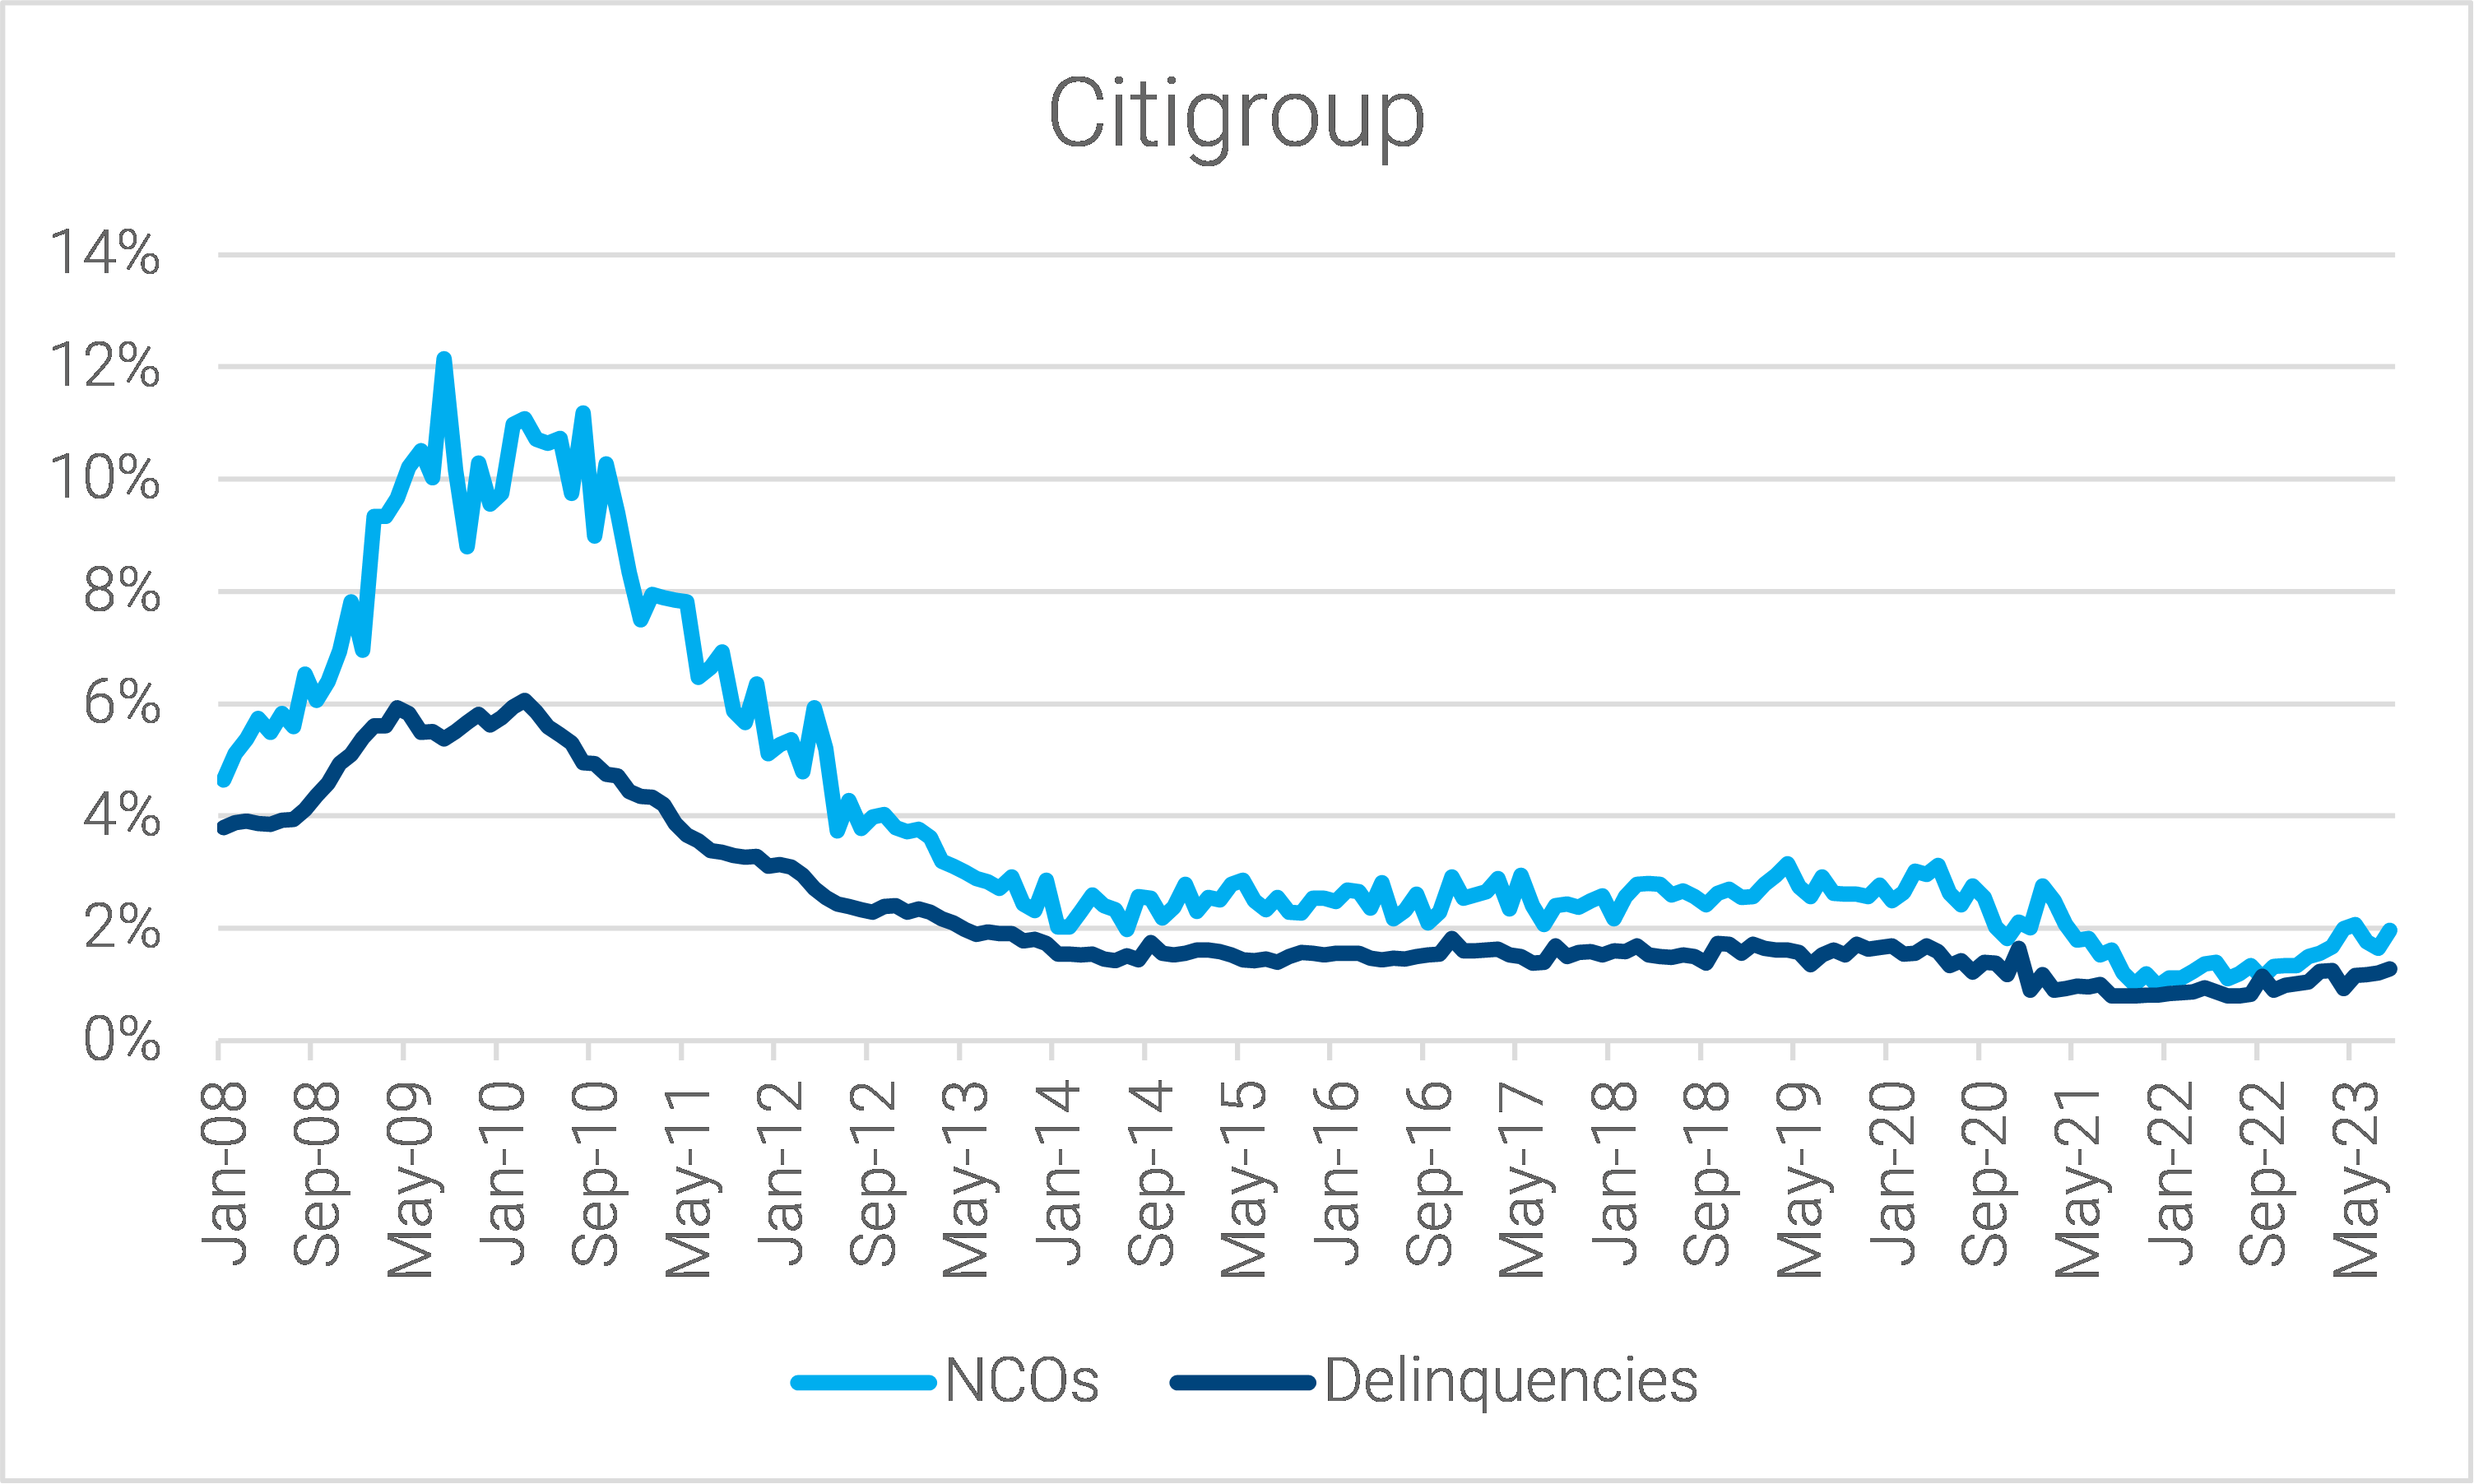 08-citigroup-master-trust-net-charge-off-and-delinquency-rates